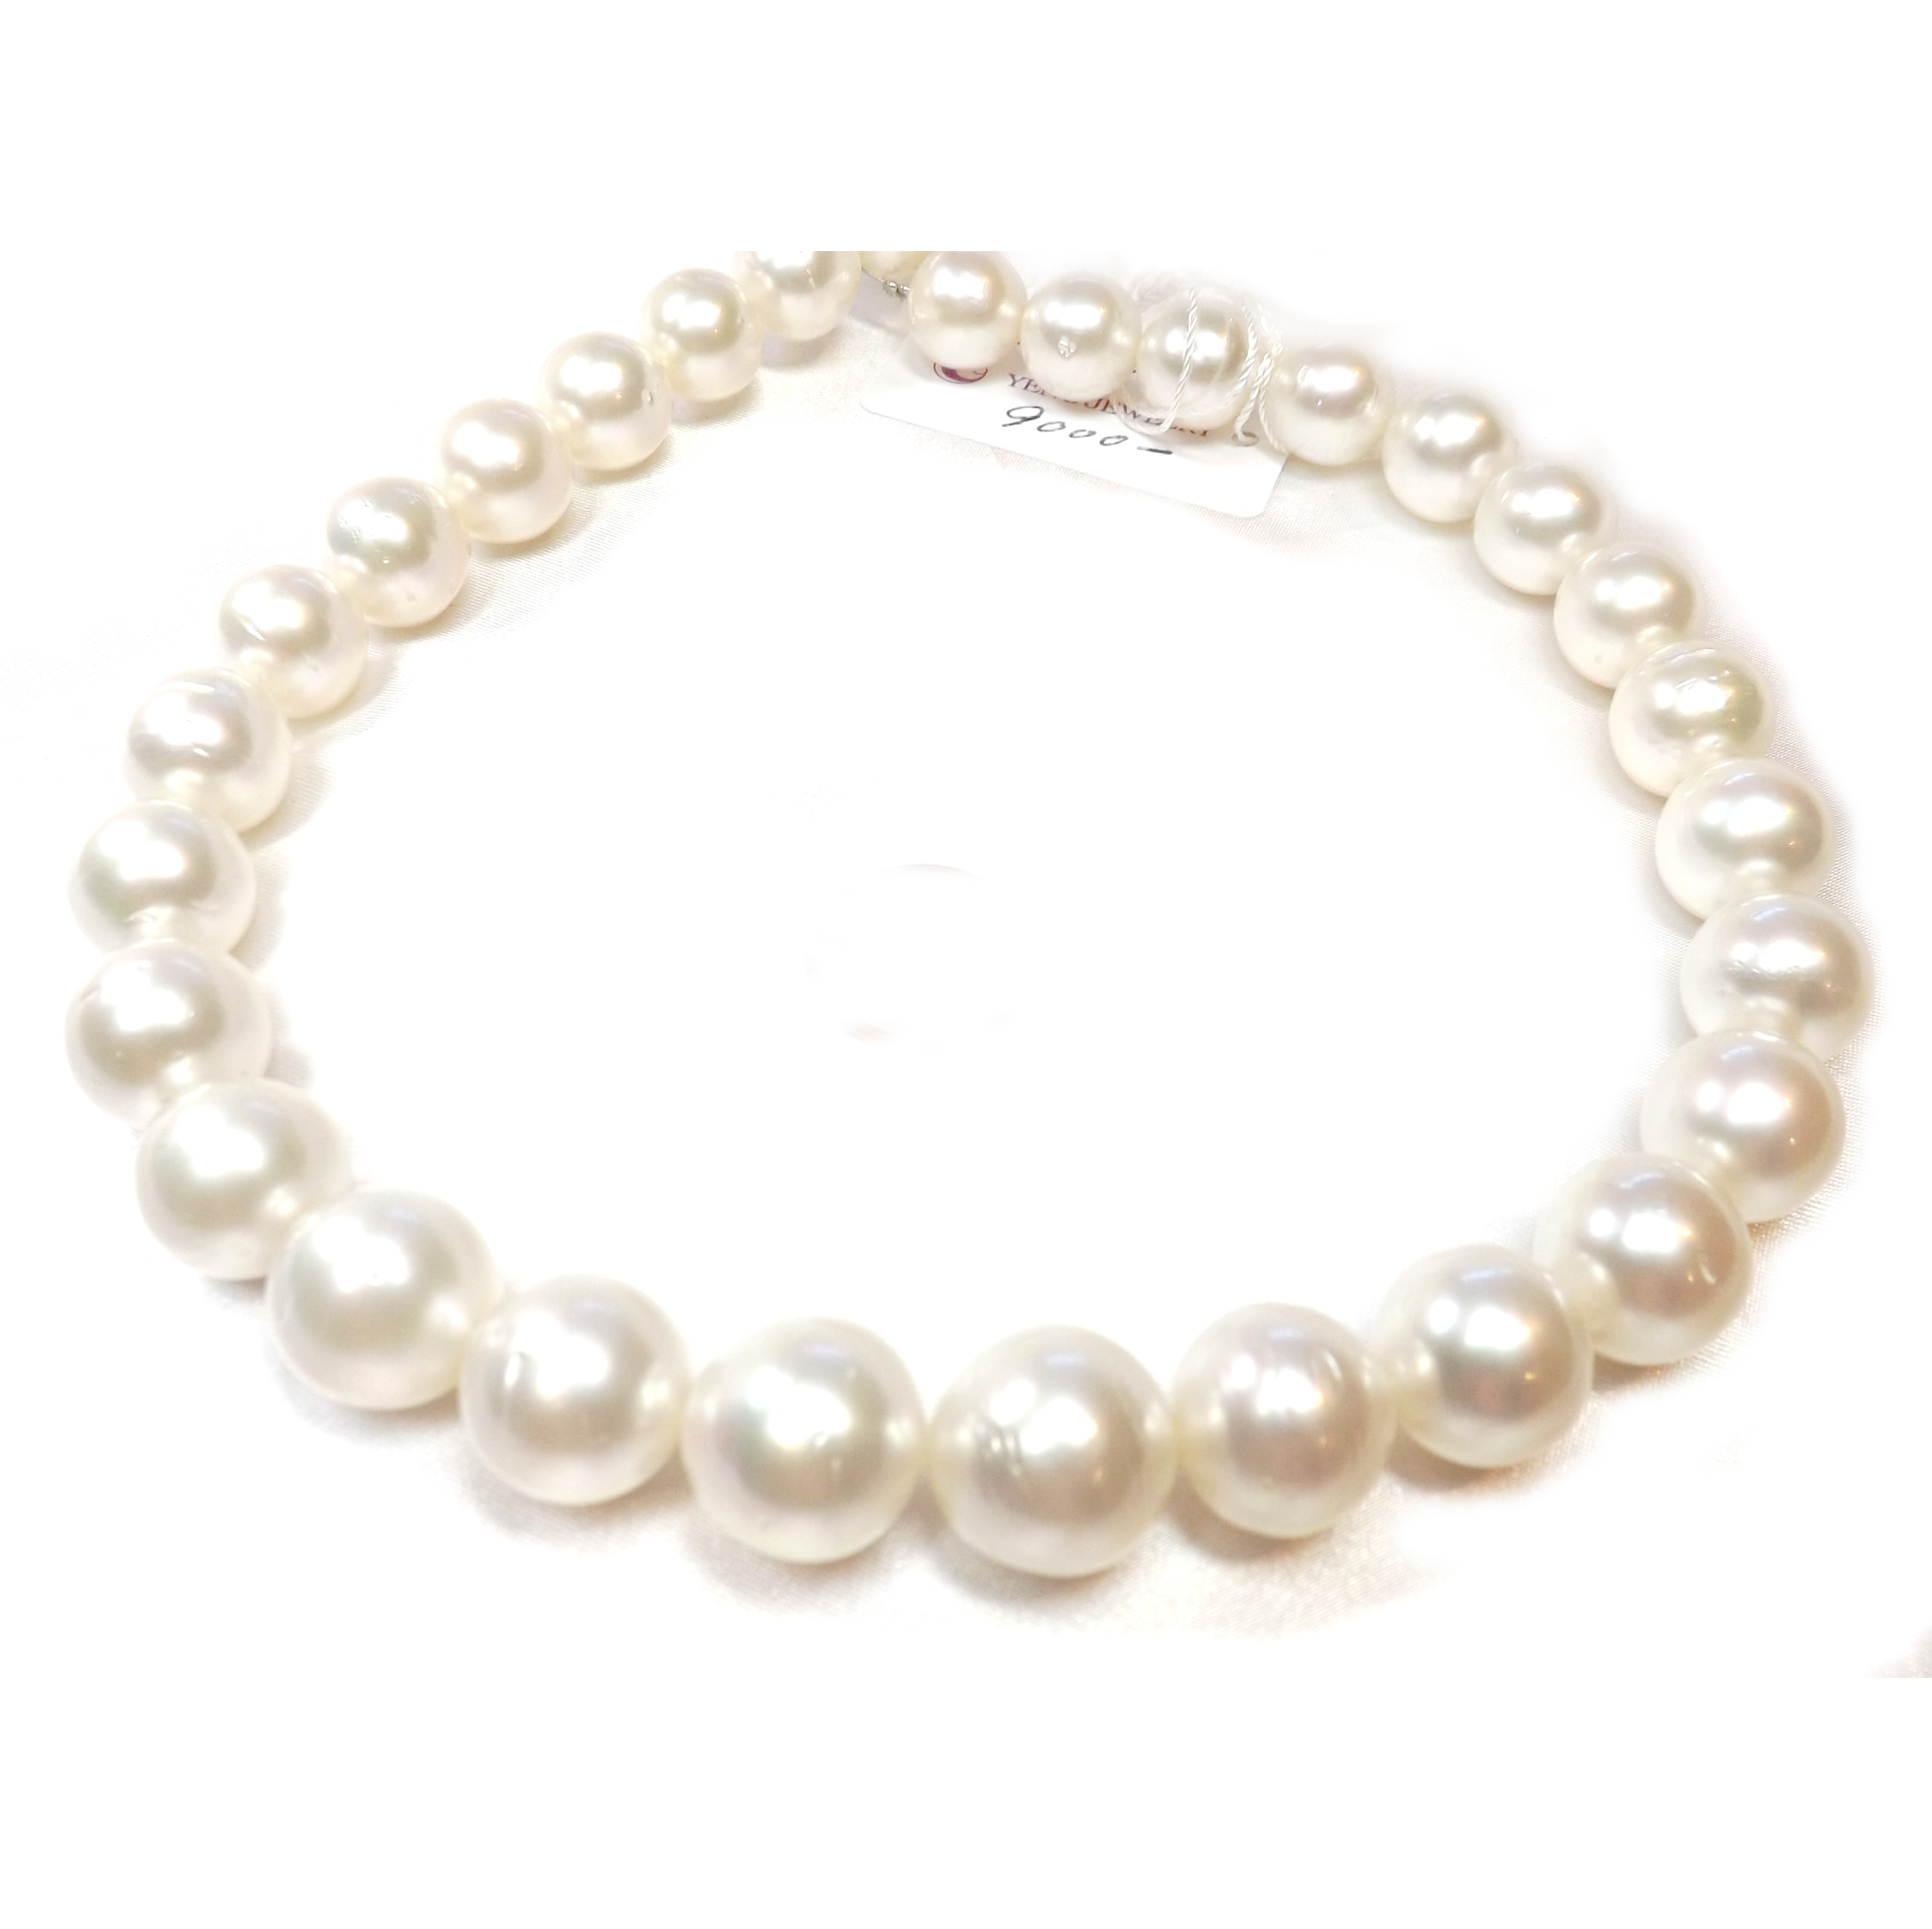 Pearls Strand Necklace w/ 14K Gold Clasp and Balls 1960s - 128 Pearls (item  #1329968)